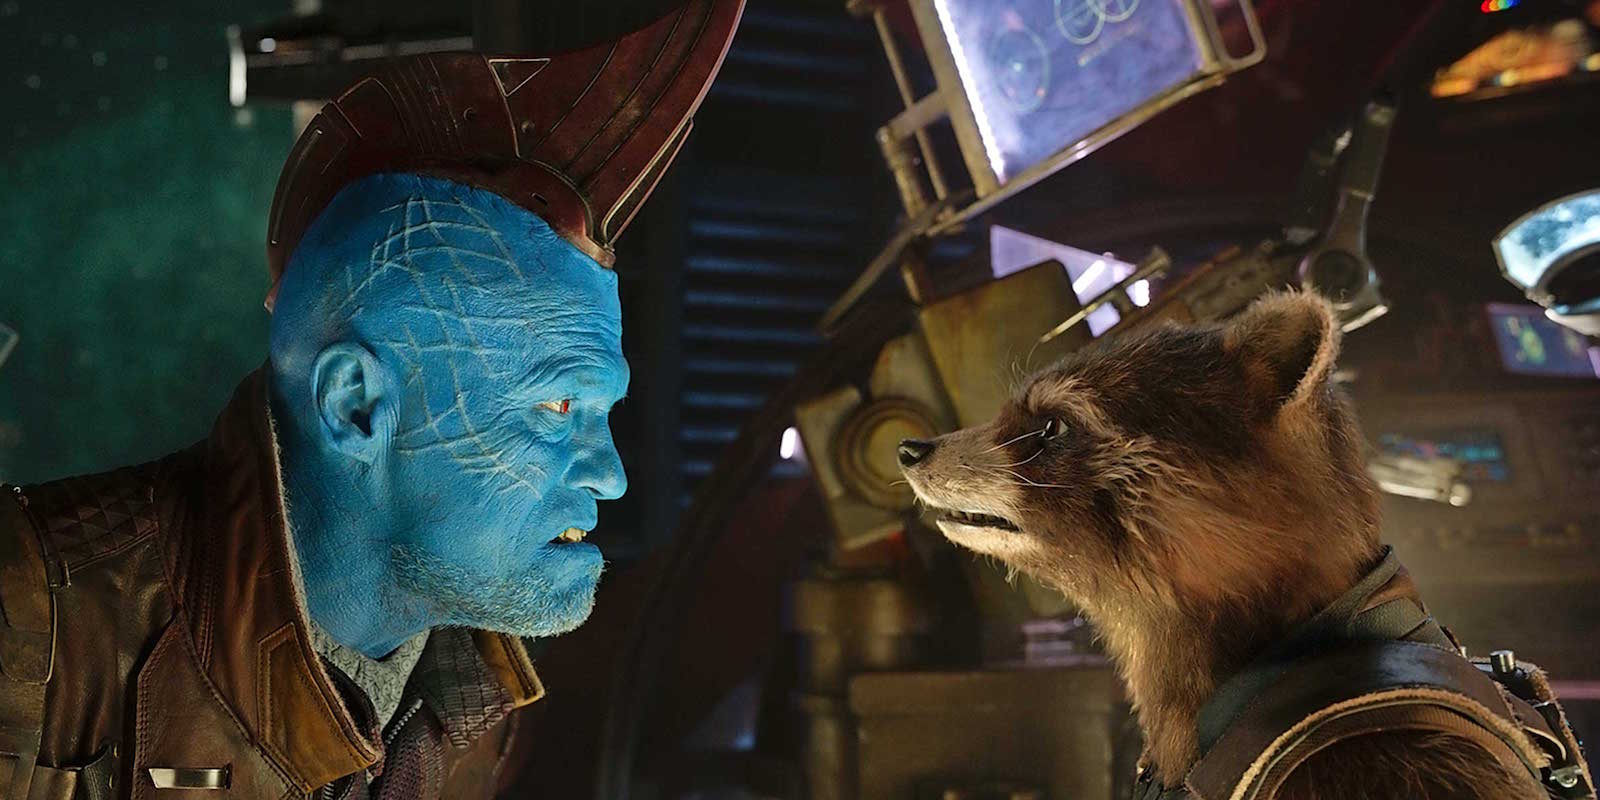 Guardians-of-the-Galaxy-Vol-2-Empire-Photo-of-Yondu-and-Rocket-Cropped.jpg